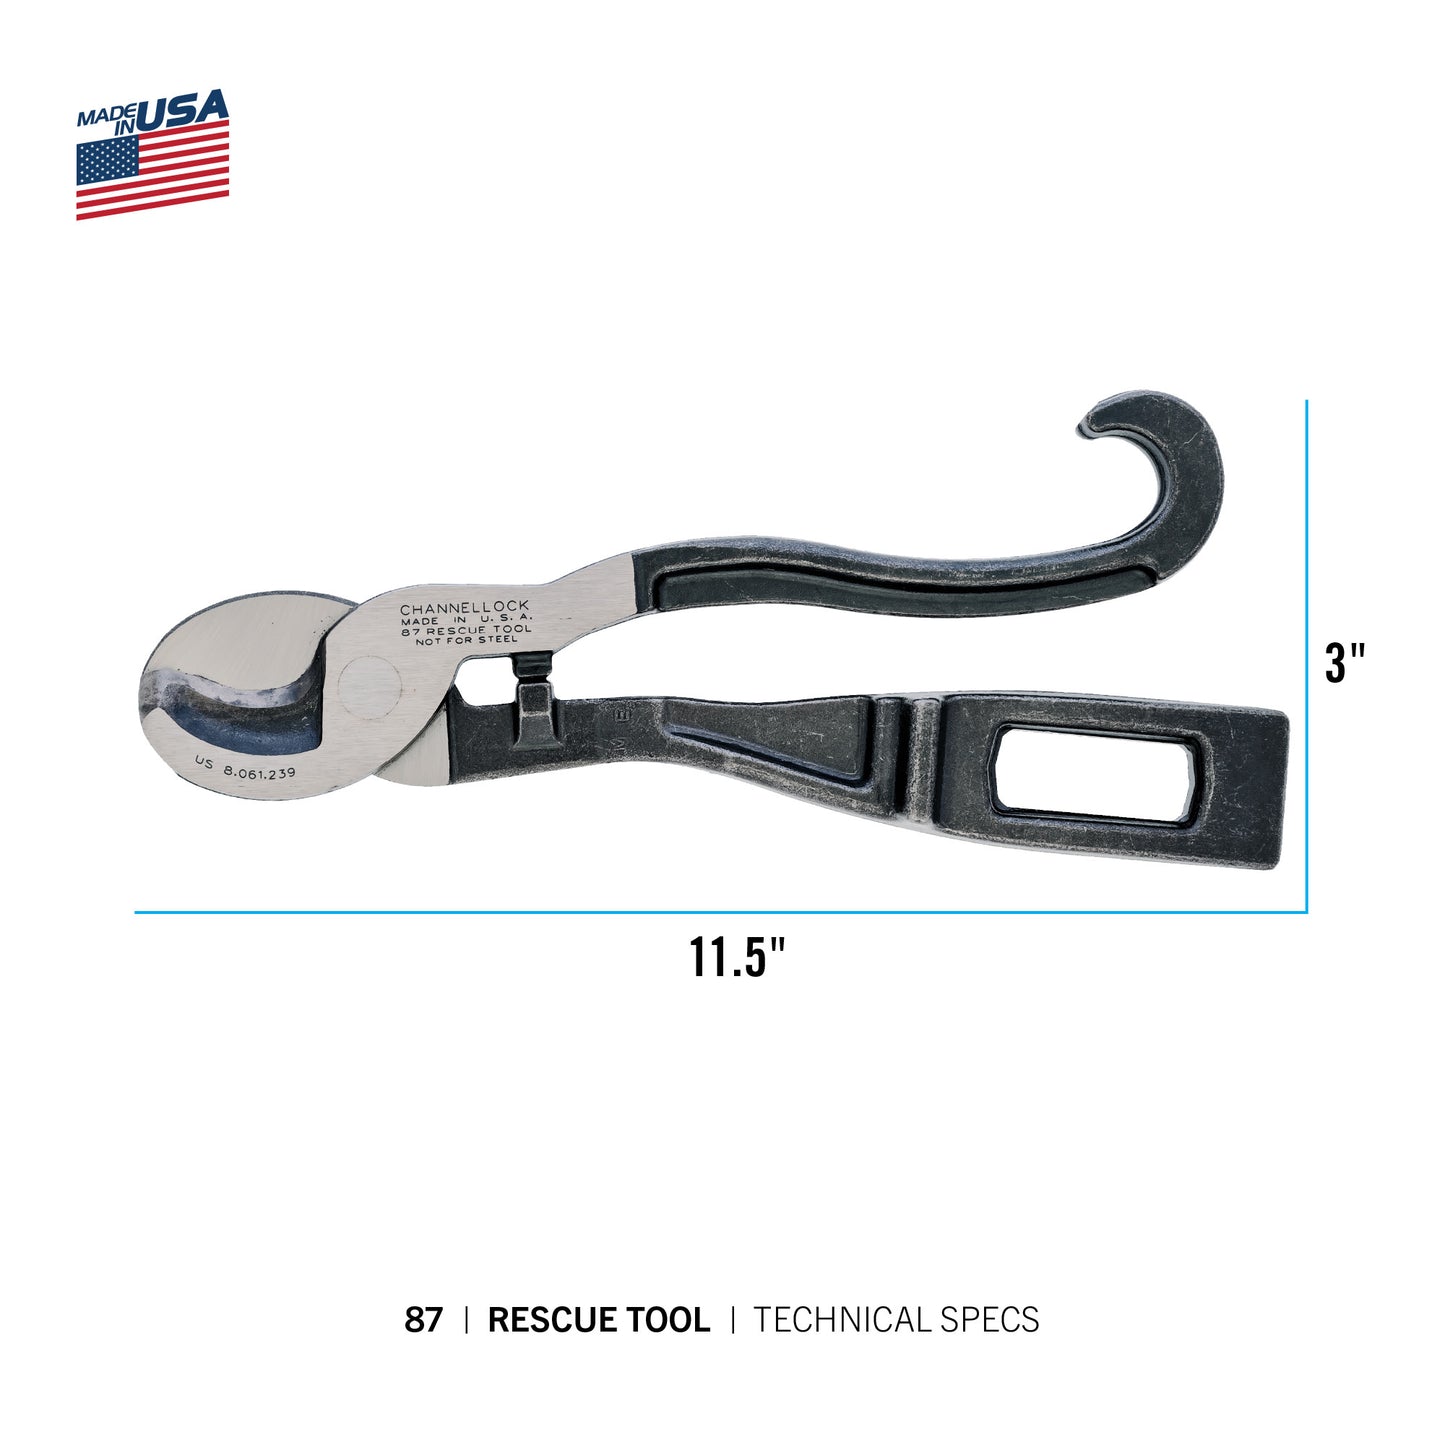 9-inch Rescue Tool (87)